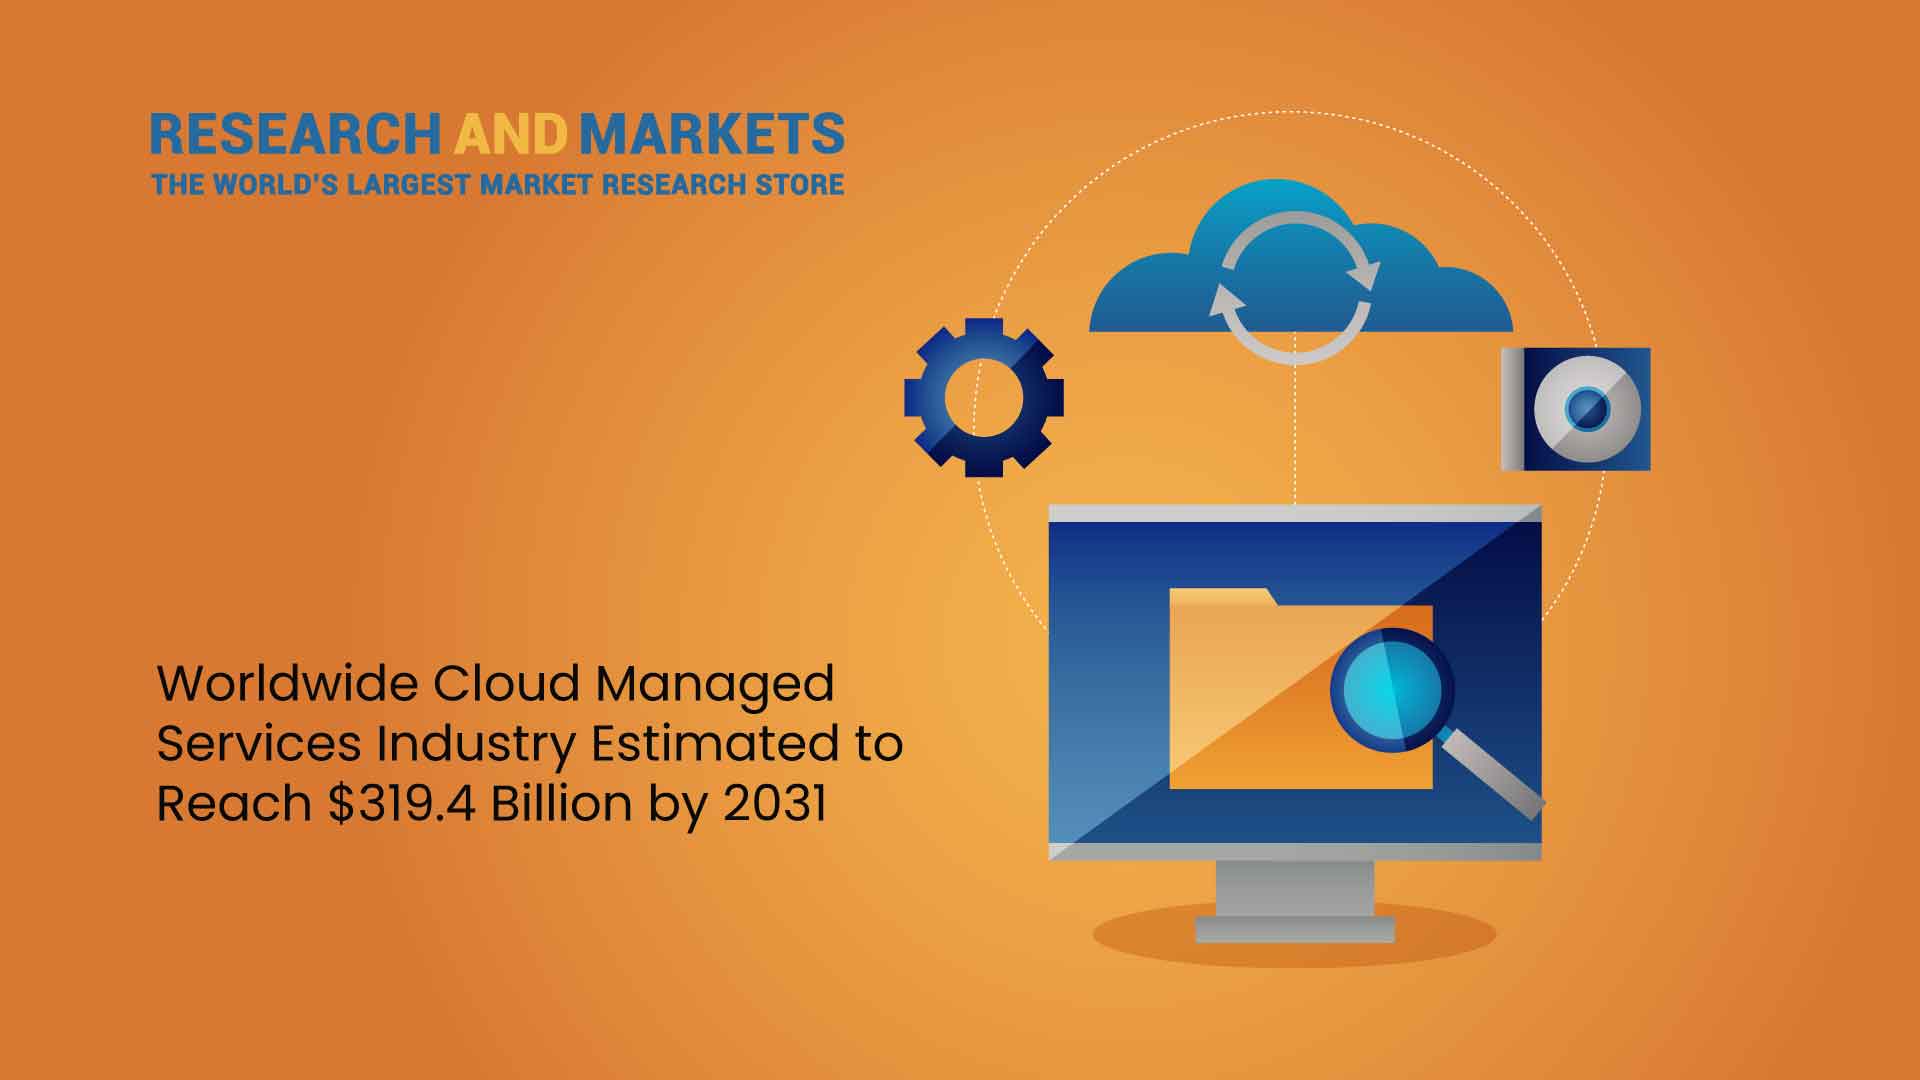 The Worldwide Cloud Managed Services Industry is Estimated to Reach $319.4 Billion by 2031